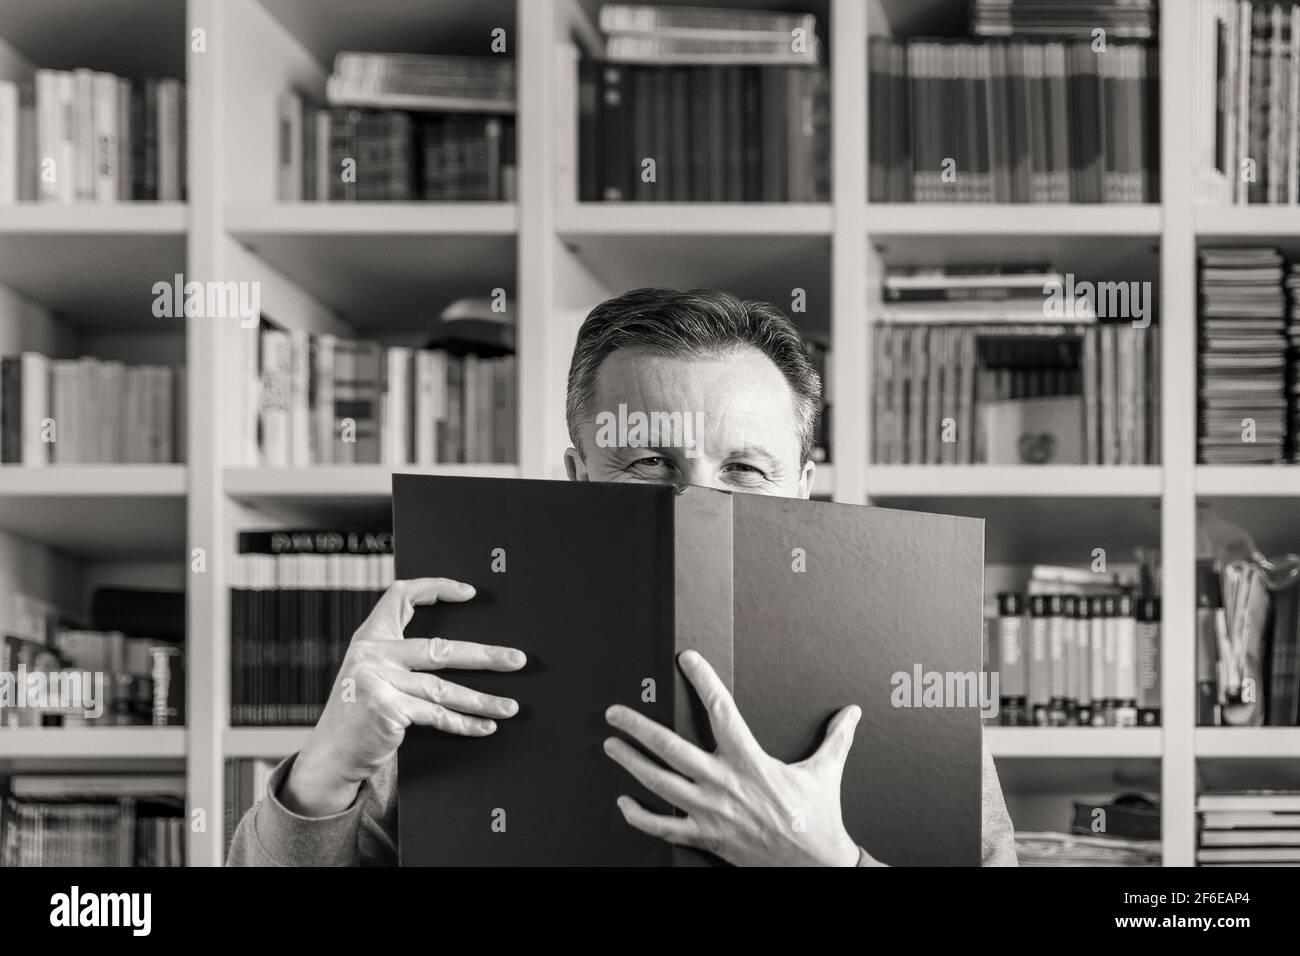 Black and white portrait of a man who has his face almost completely covered by a large book with a square bookcase in the background Stock Photo